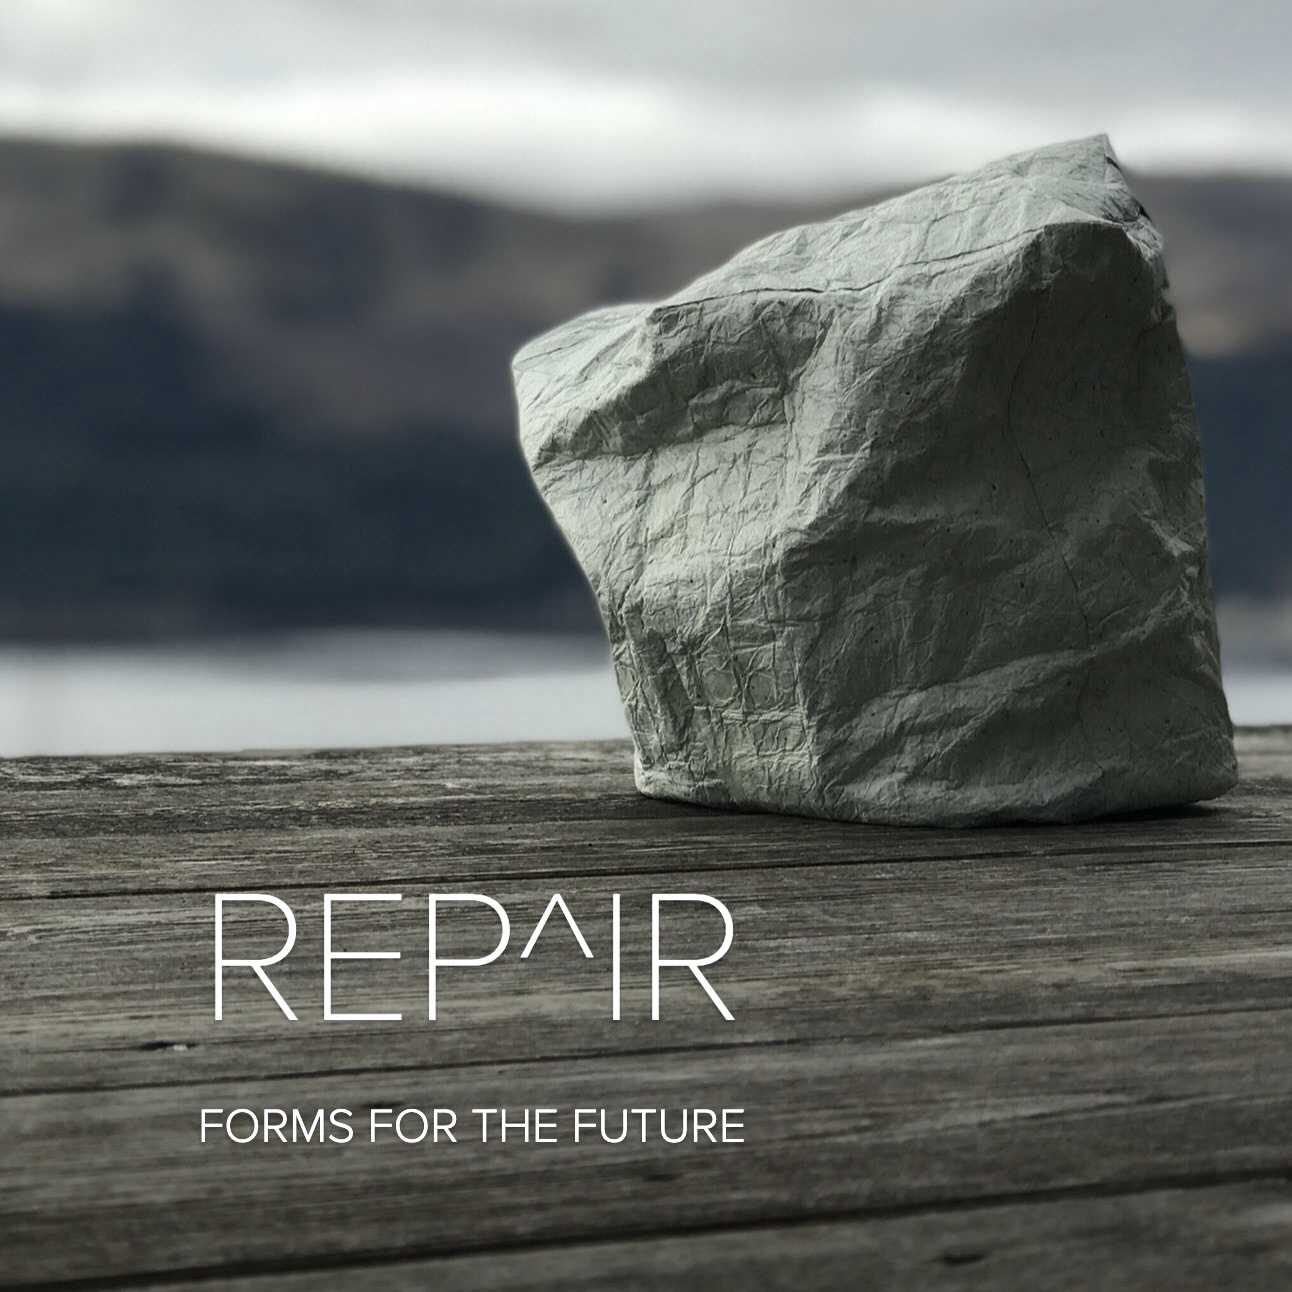 A grey-green rock-like sculptural form, photographed against a landscape background. It is titled REPAIR - Forms for the Future.